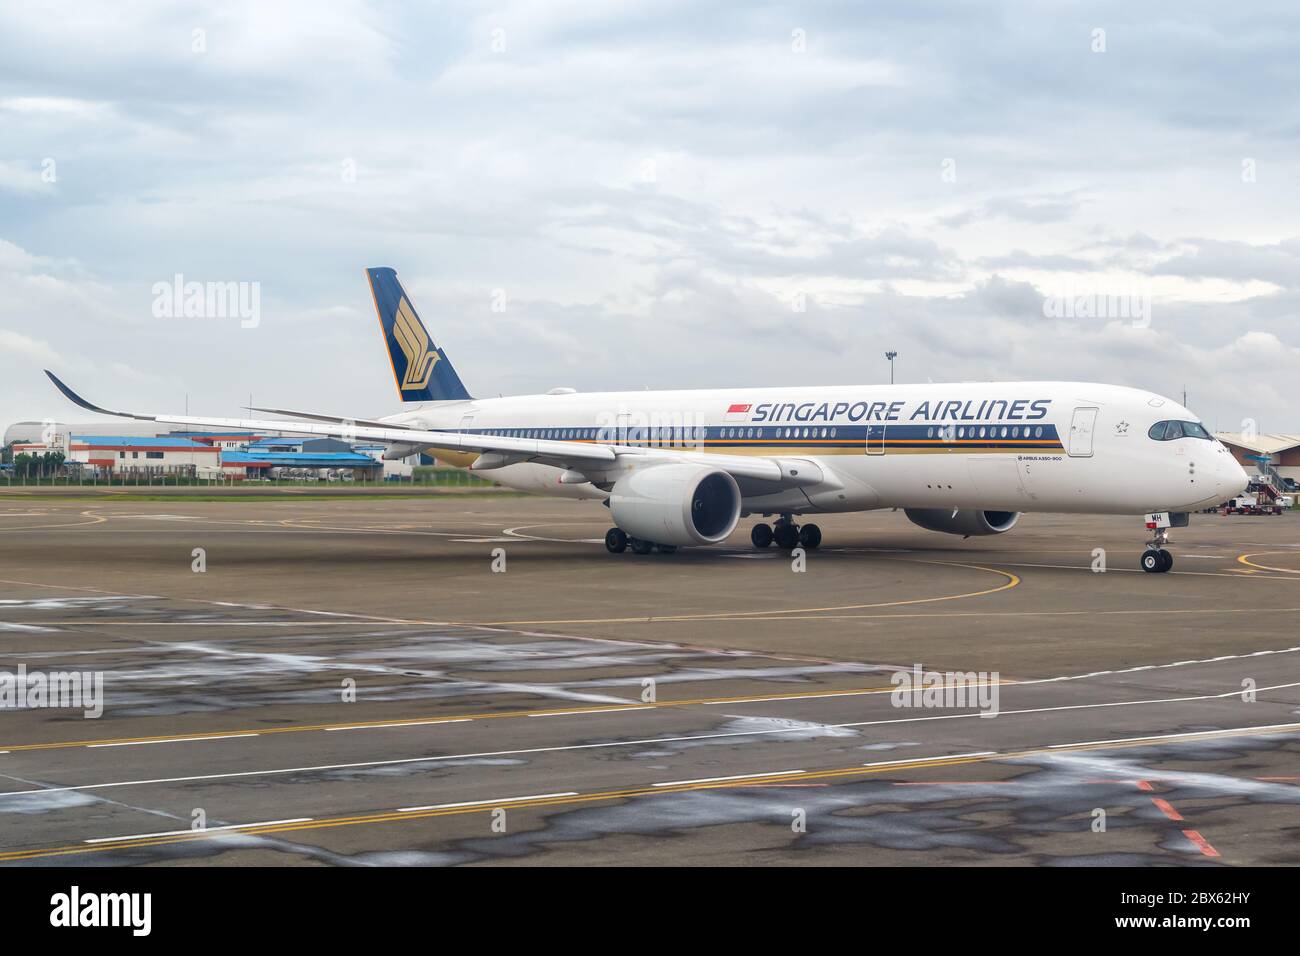 Jakarta, Indonesia January 28, 2018: Singapore Airlines Airbus A350-900 airplane at Jakarta airport CGK in Indonesia. Airbus is a European aircraft ma Stock Photo